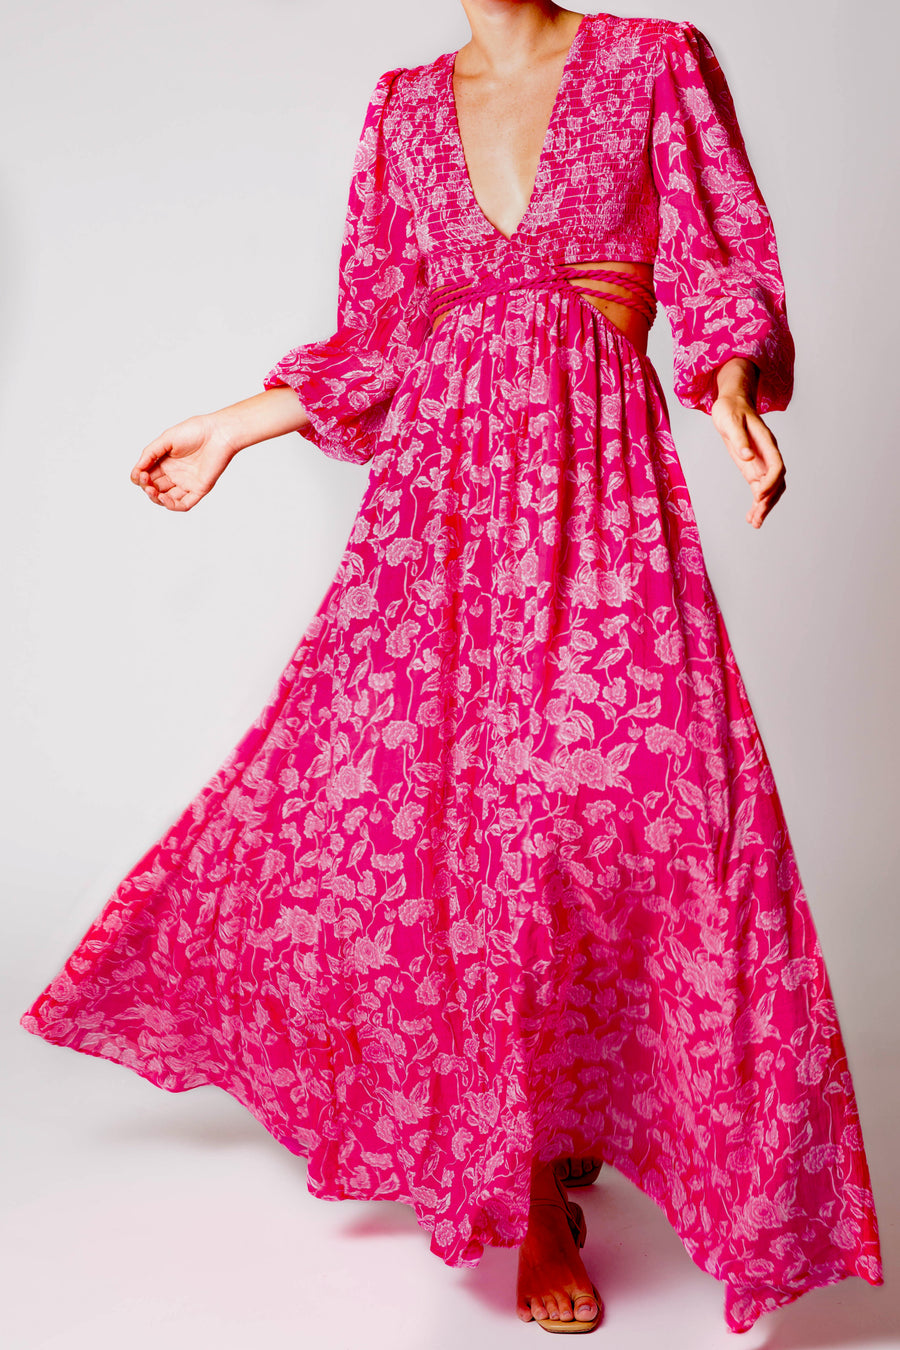 This is a photo of a woman wearing a flowy pink maxi dress.